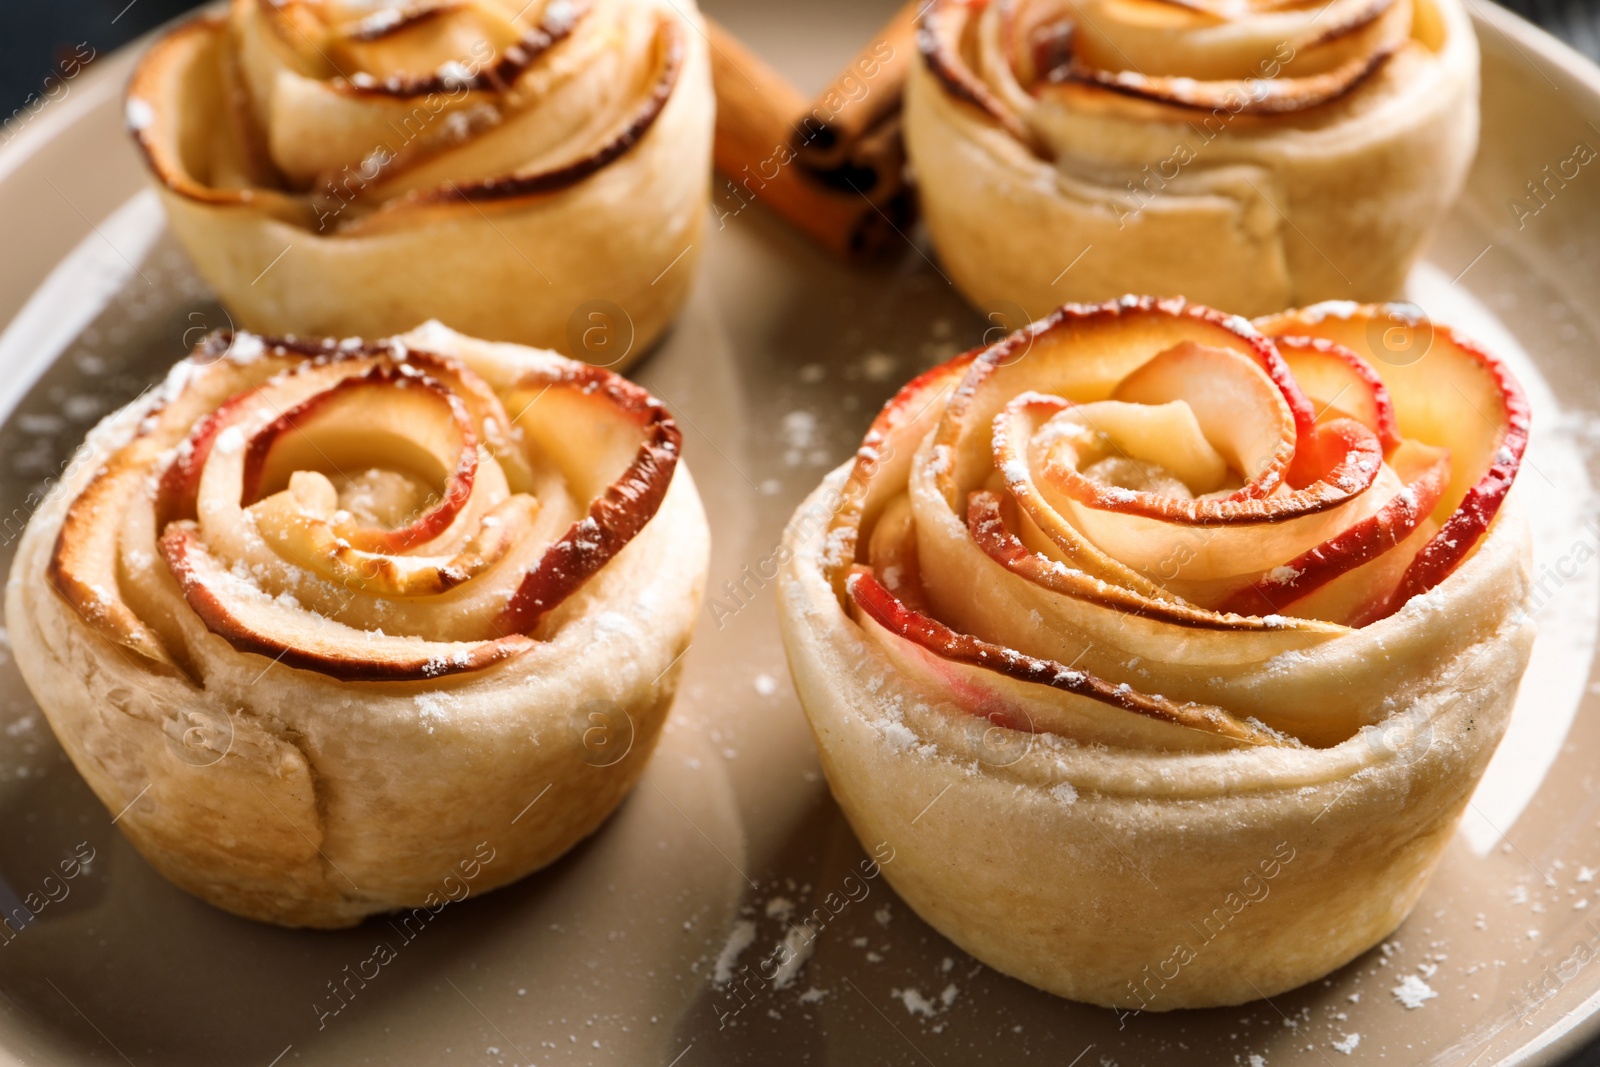 Photo of Freshly baked apple roses on plate, closeup. Beautiful dessert